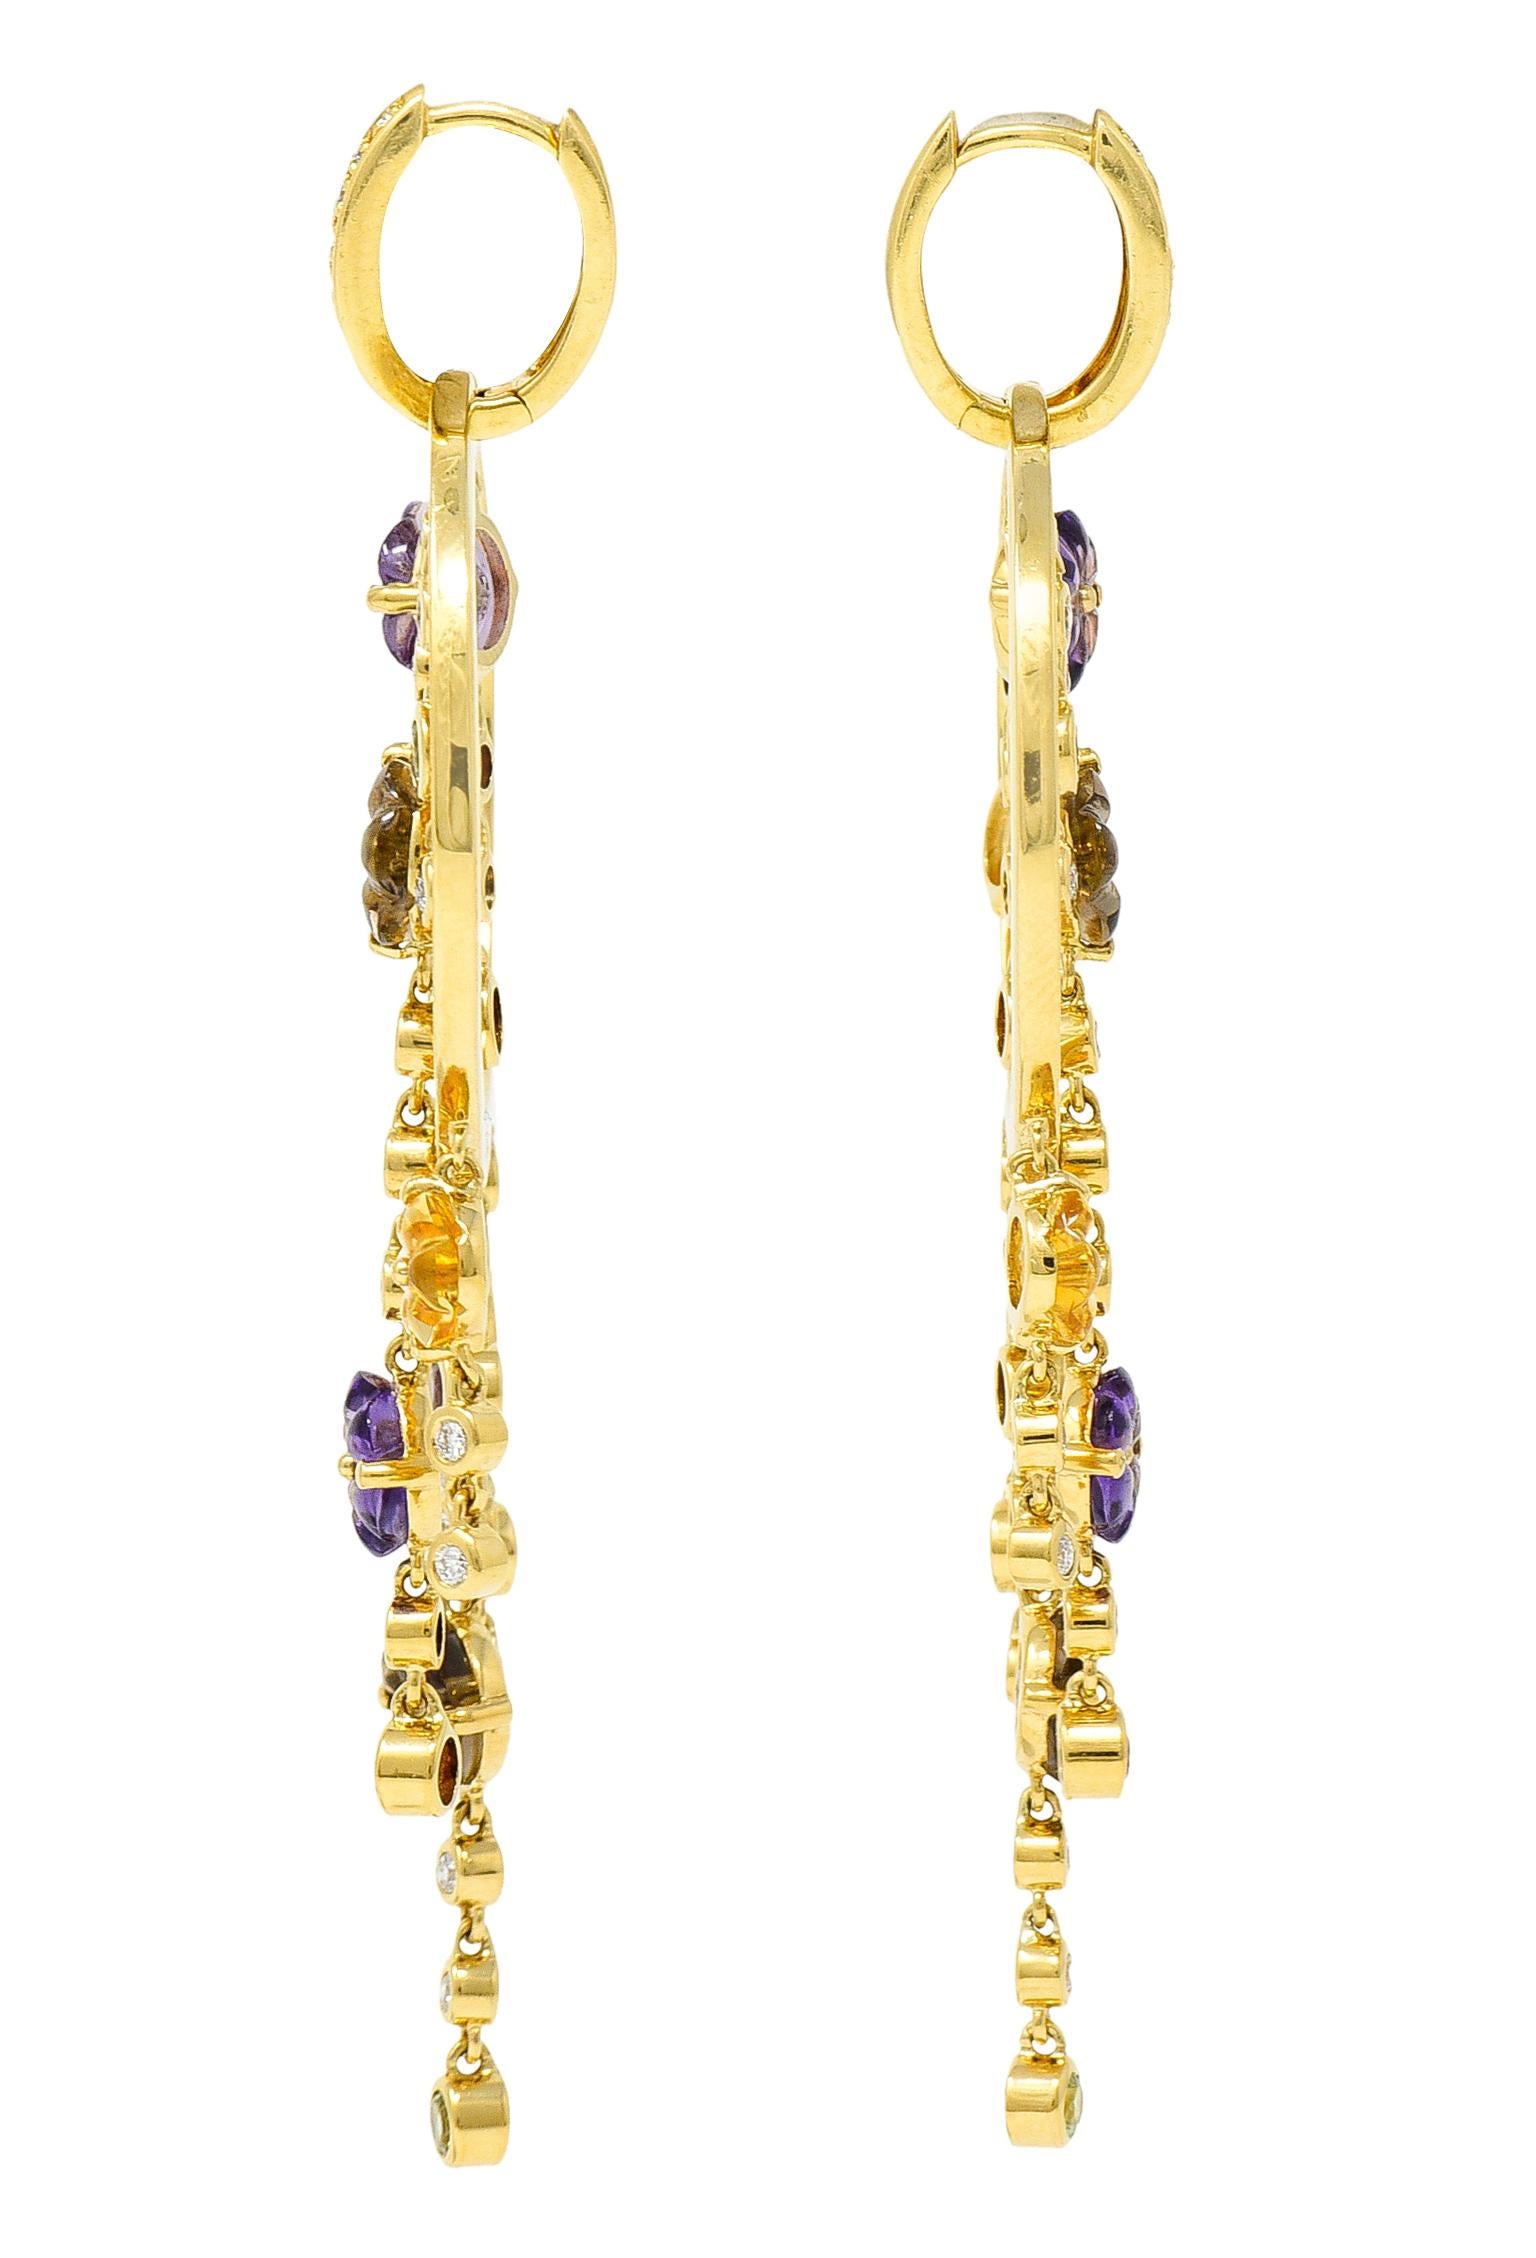 Substantial earrings are designed with a diamond huggie hoop surmount

Suspending a large circular drop decorated with articulated gemstone fringe

Featuring carved flowers and round cut amethysts, peridot, smokey quartz, citrine, and